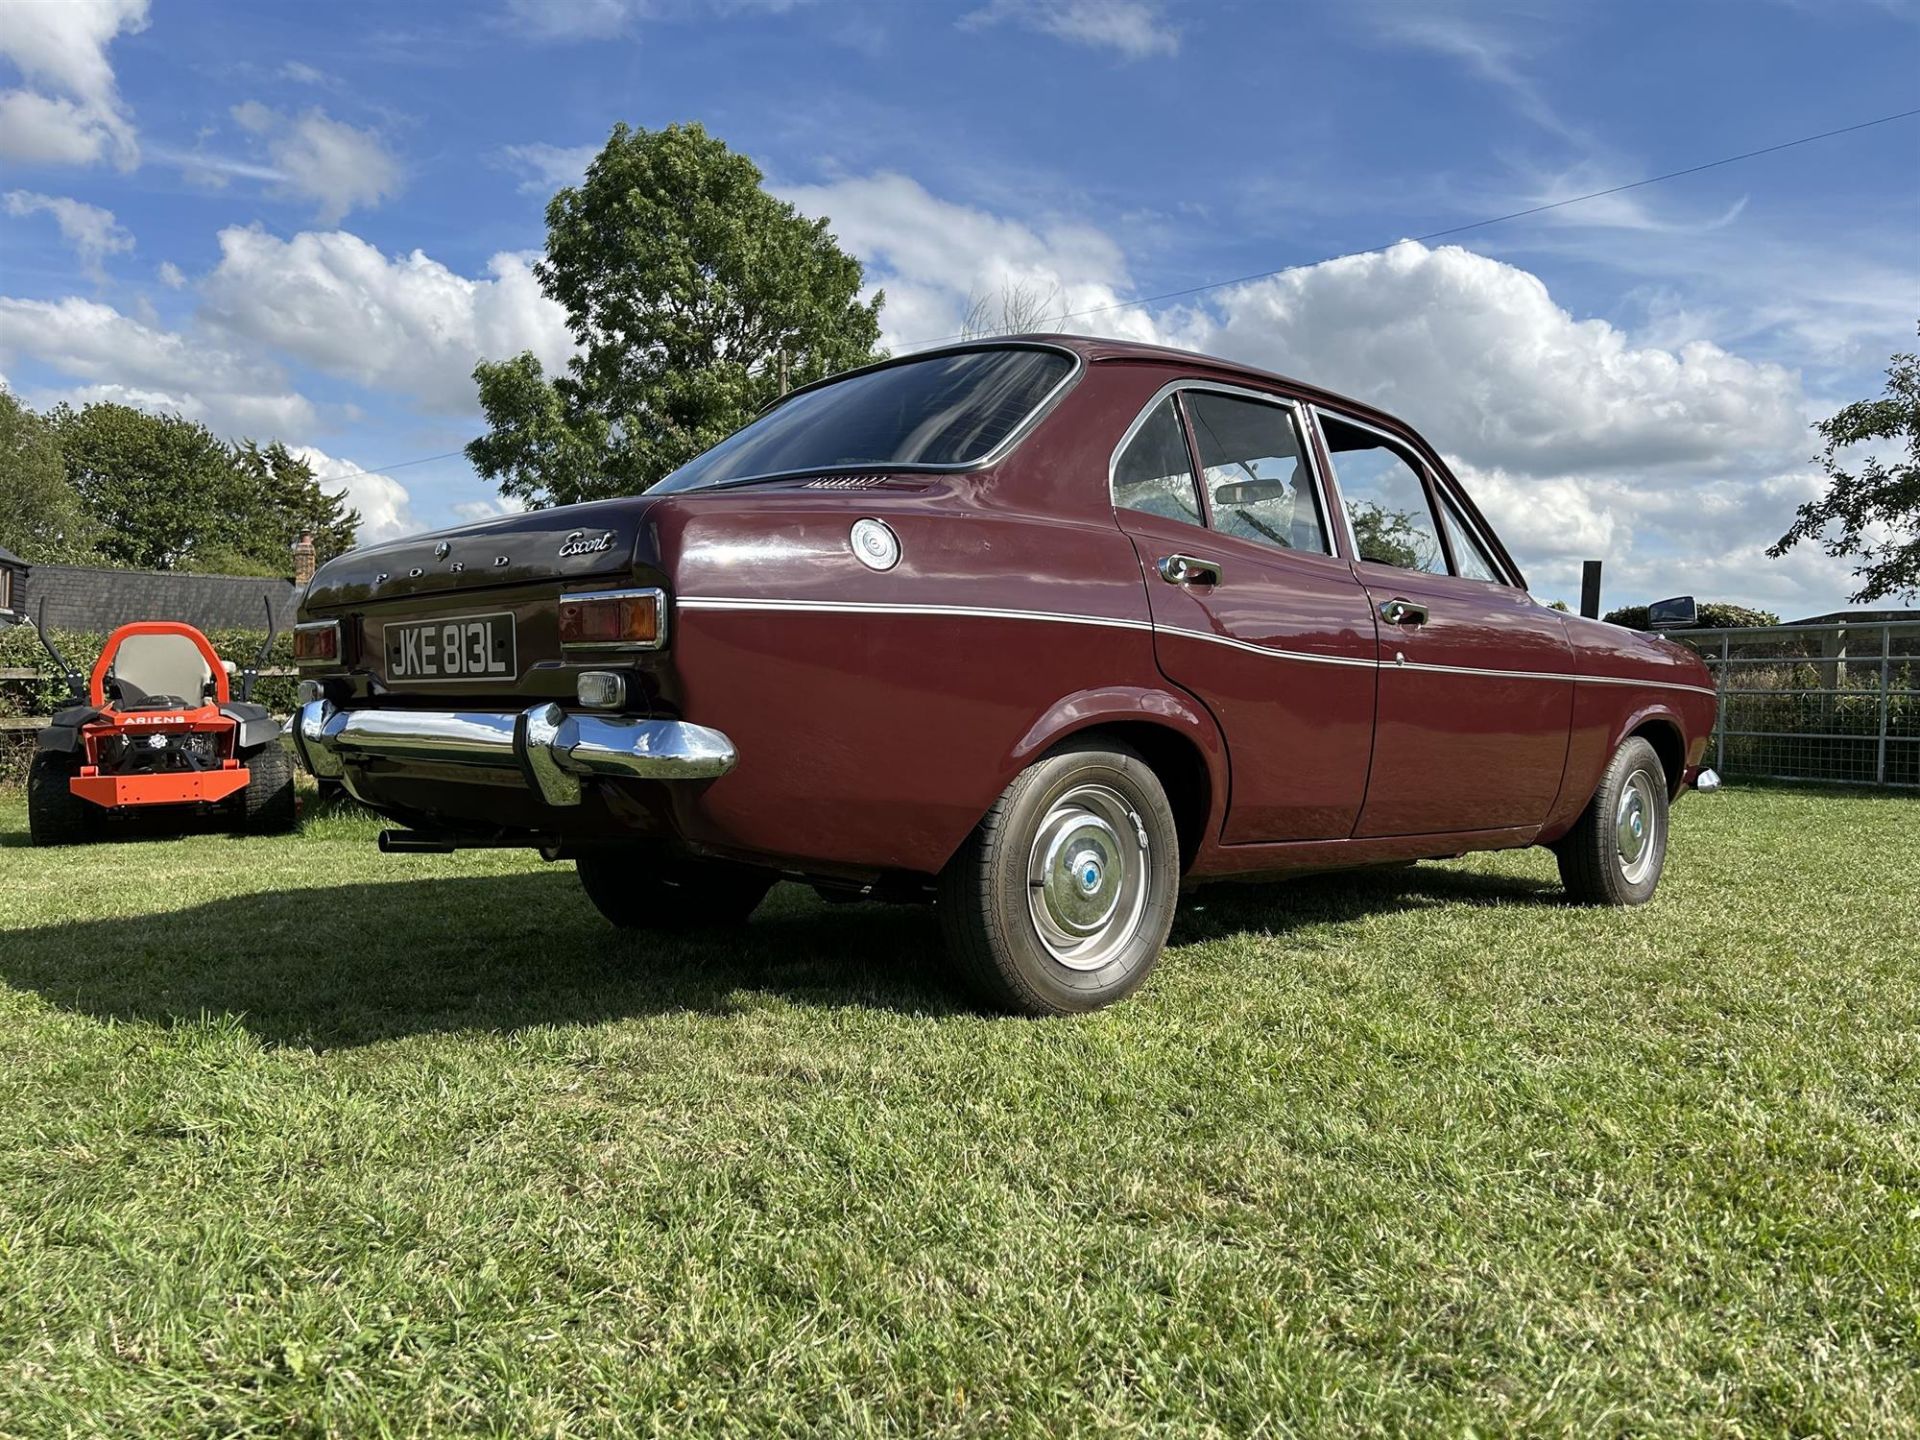 1973 Ford Escort 1300 XL - Image 4 of 10